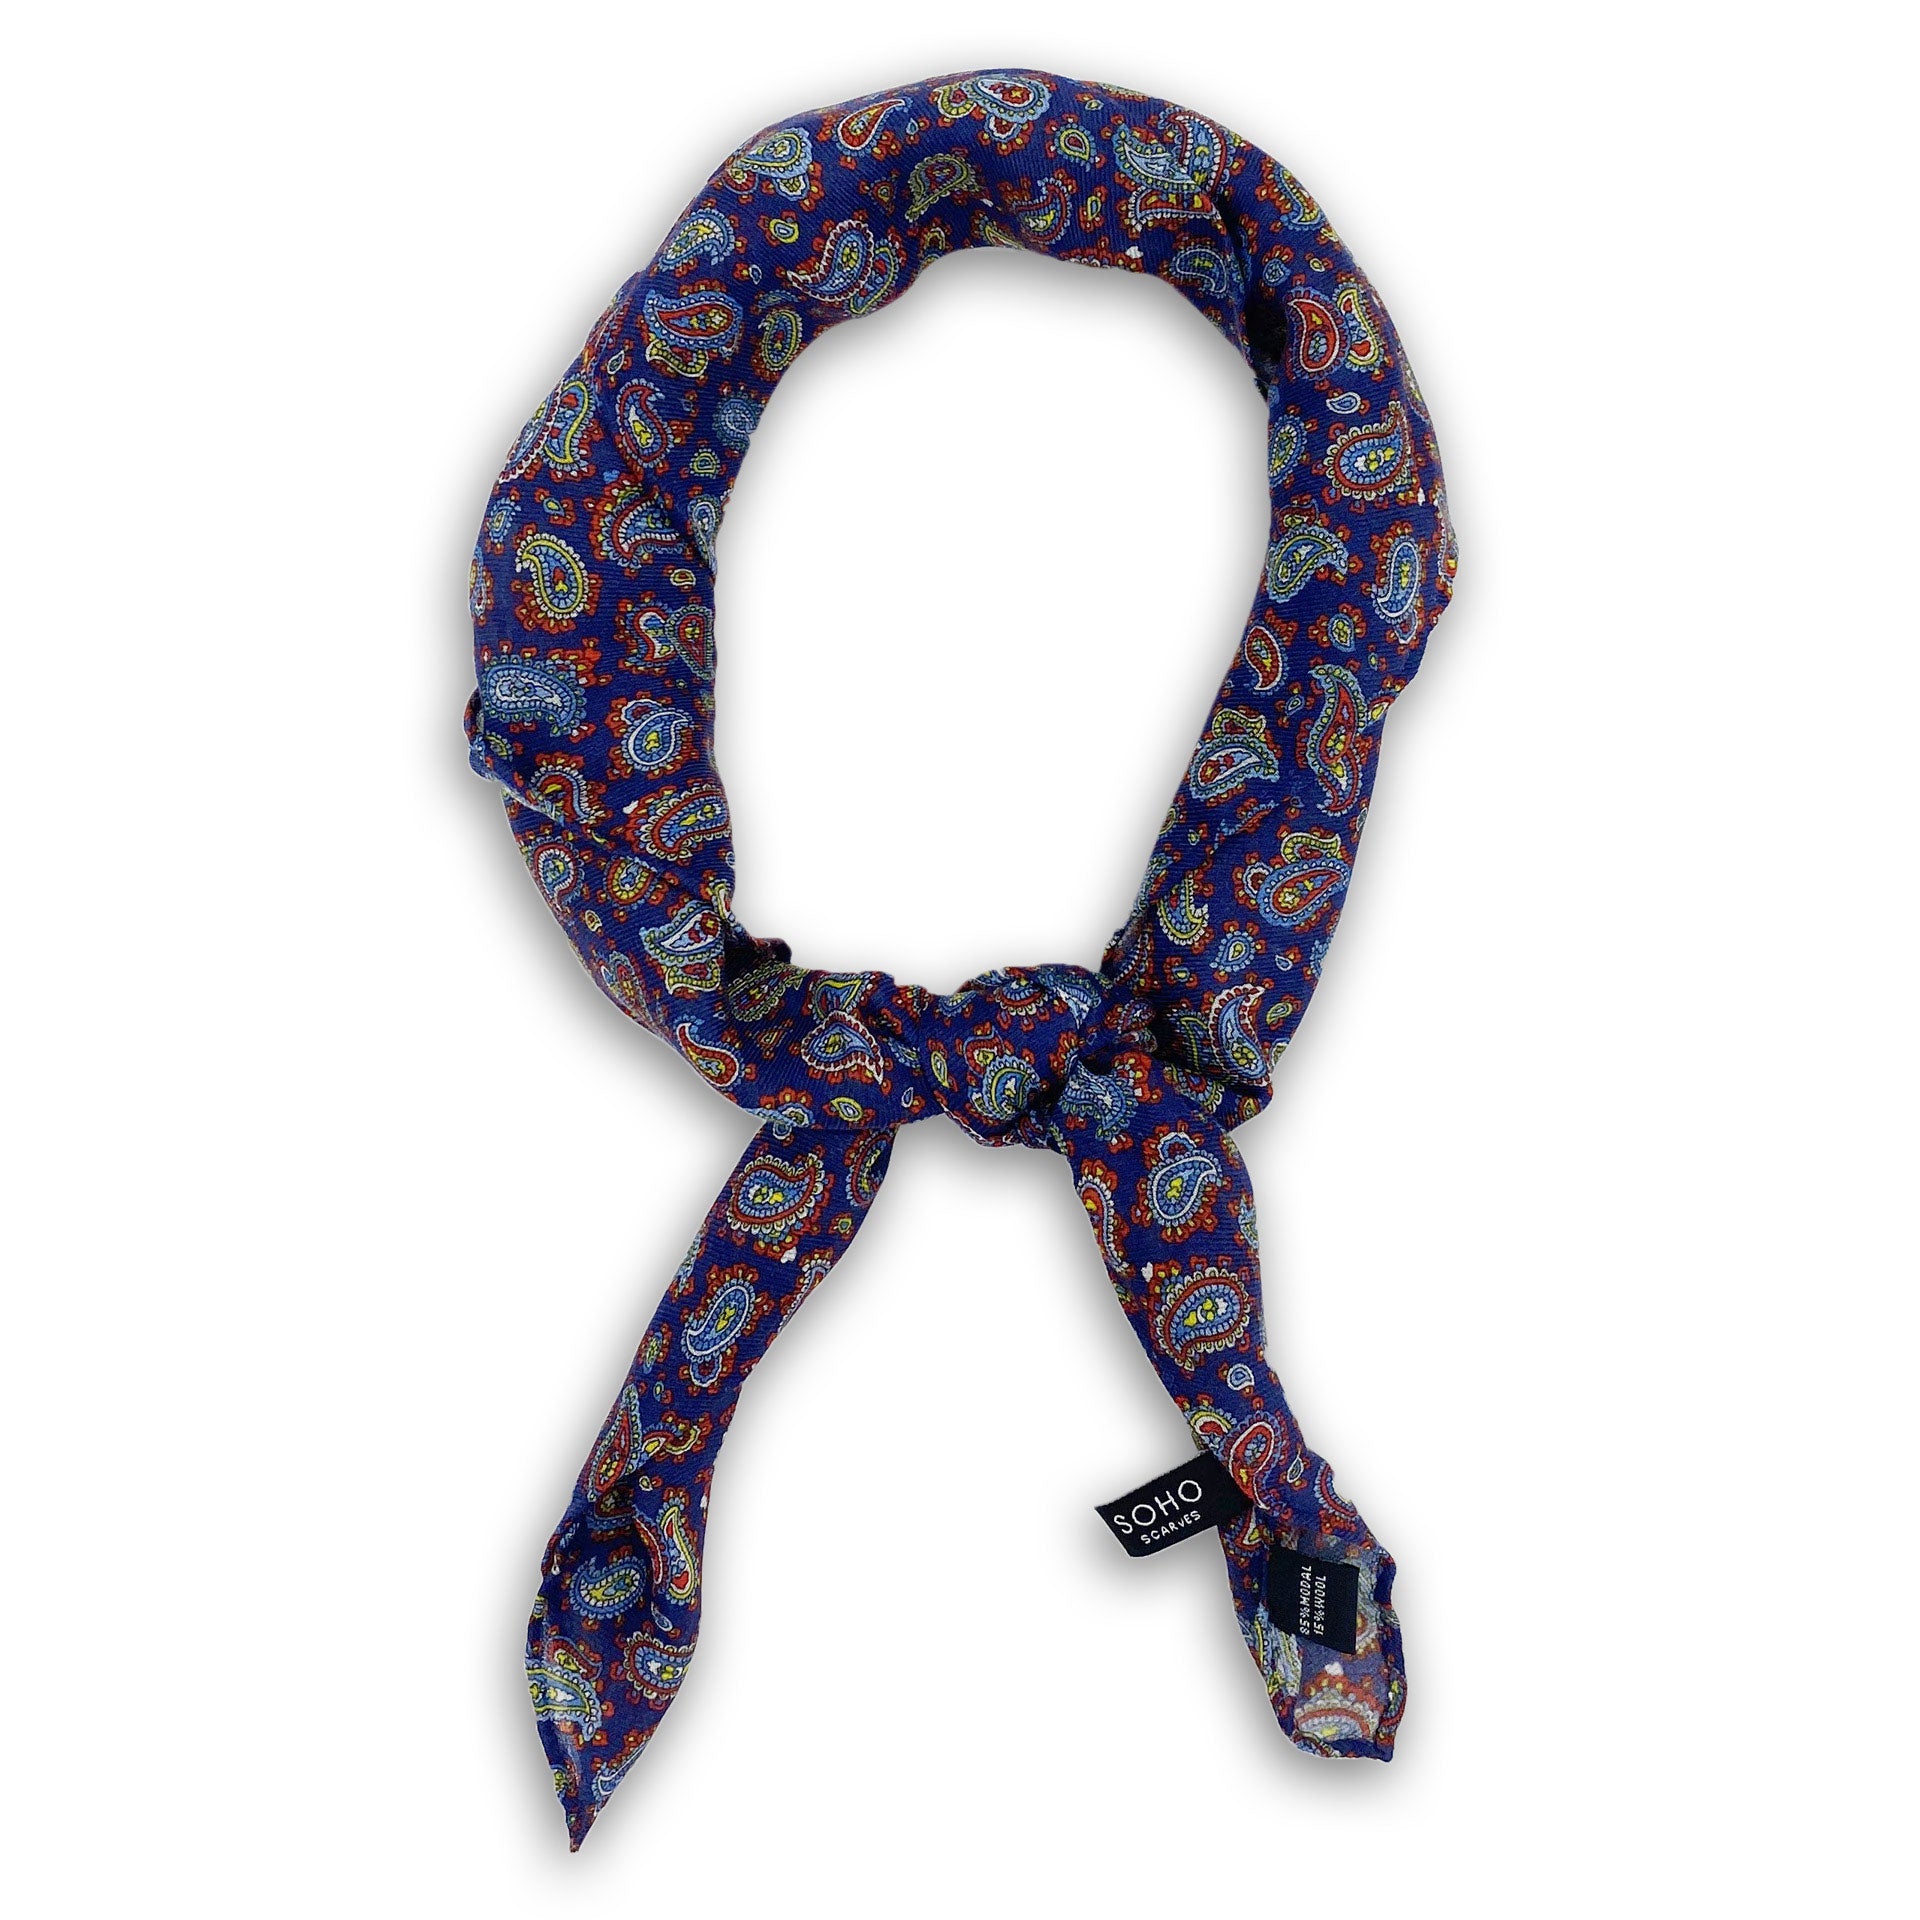 'The Lexington' light blue, gold and white paisley patterned bandana on a dark purple-blue background. Knotted into a loop on a white background.